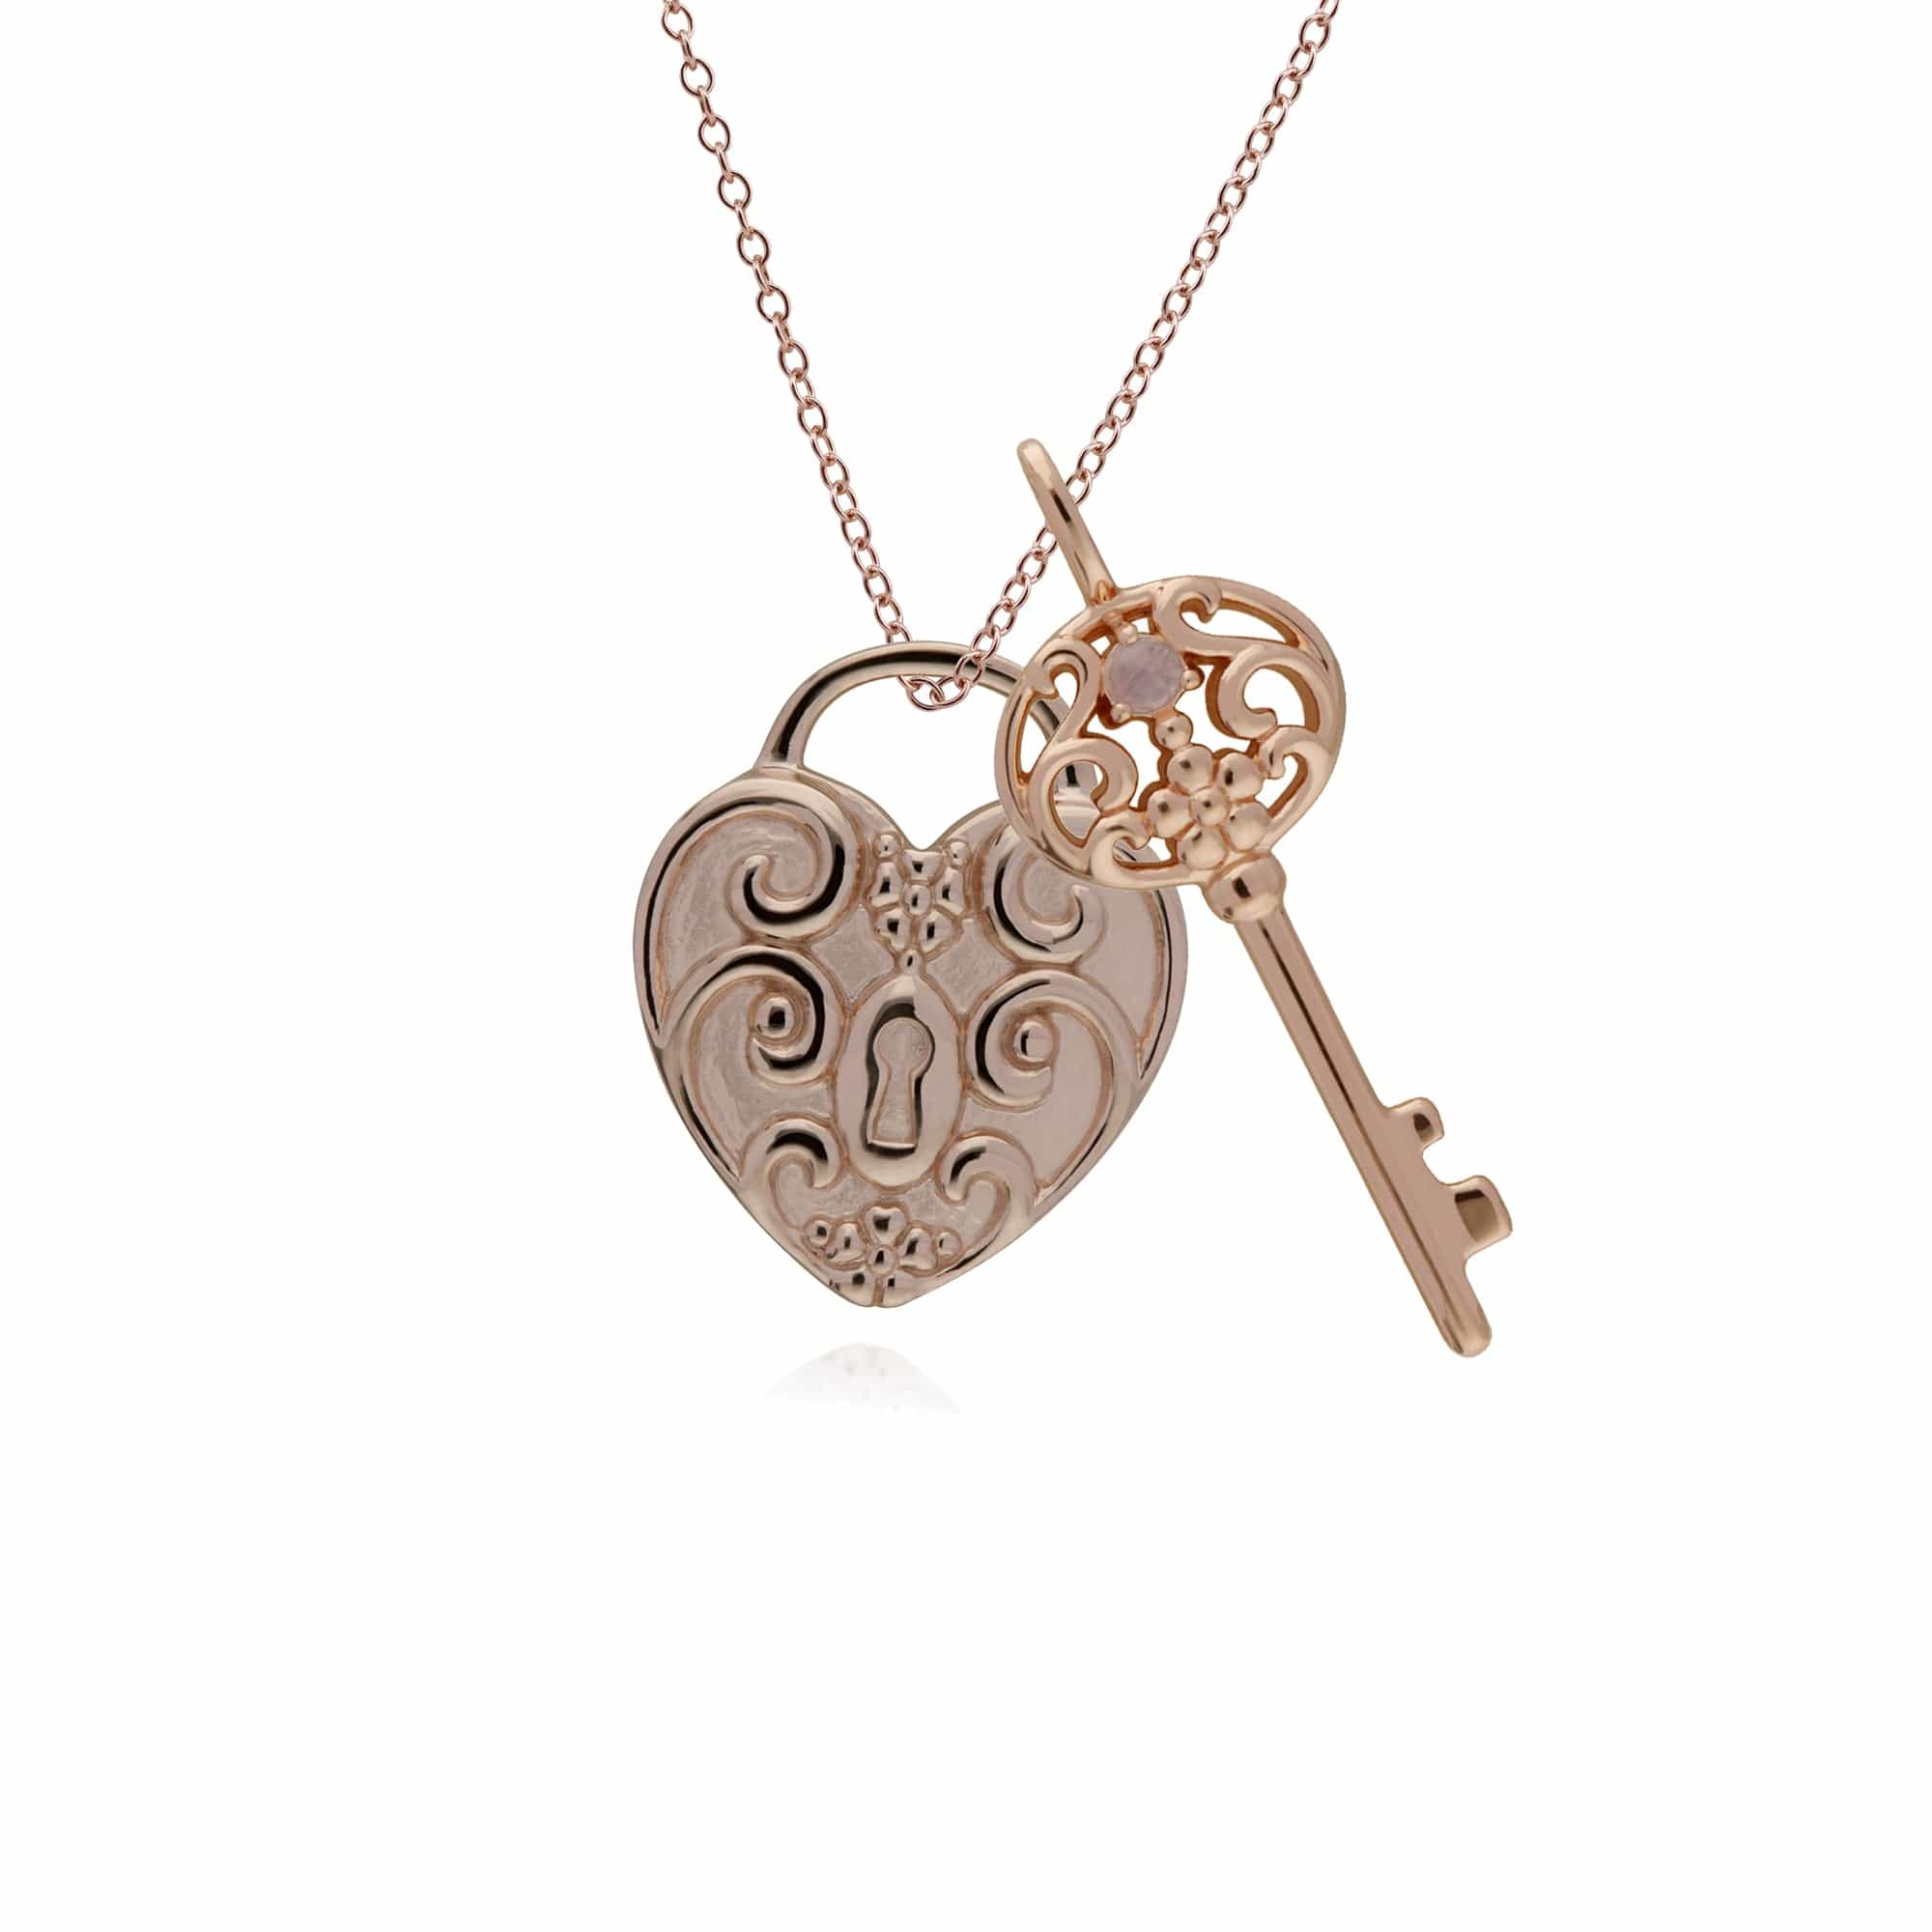 270P026713925-270P026501925 Classic Swirl Heart Lock Pendant & Rainbow Moonstone Big Key Charm in Rose Gold Plated 925 Sterling Silver 1